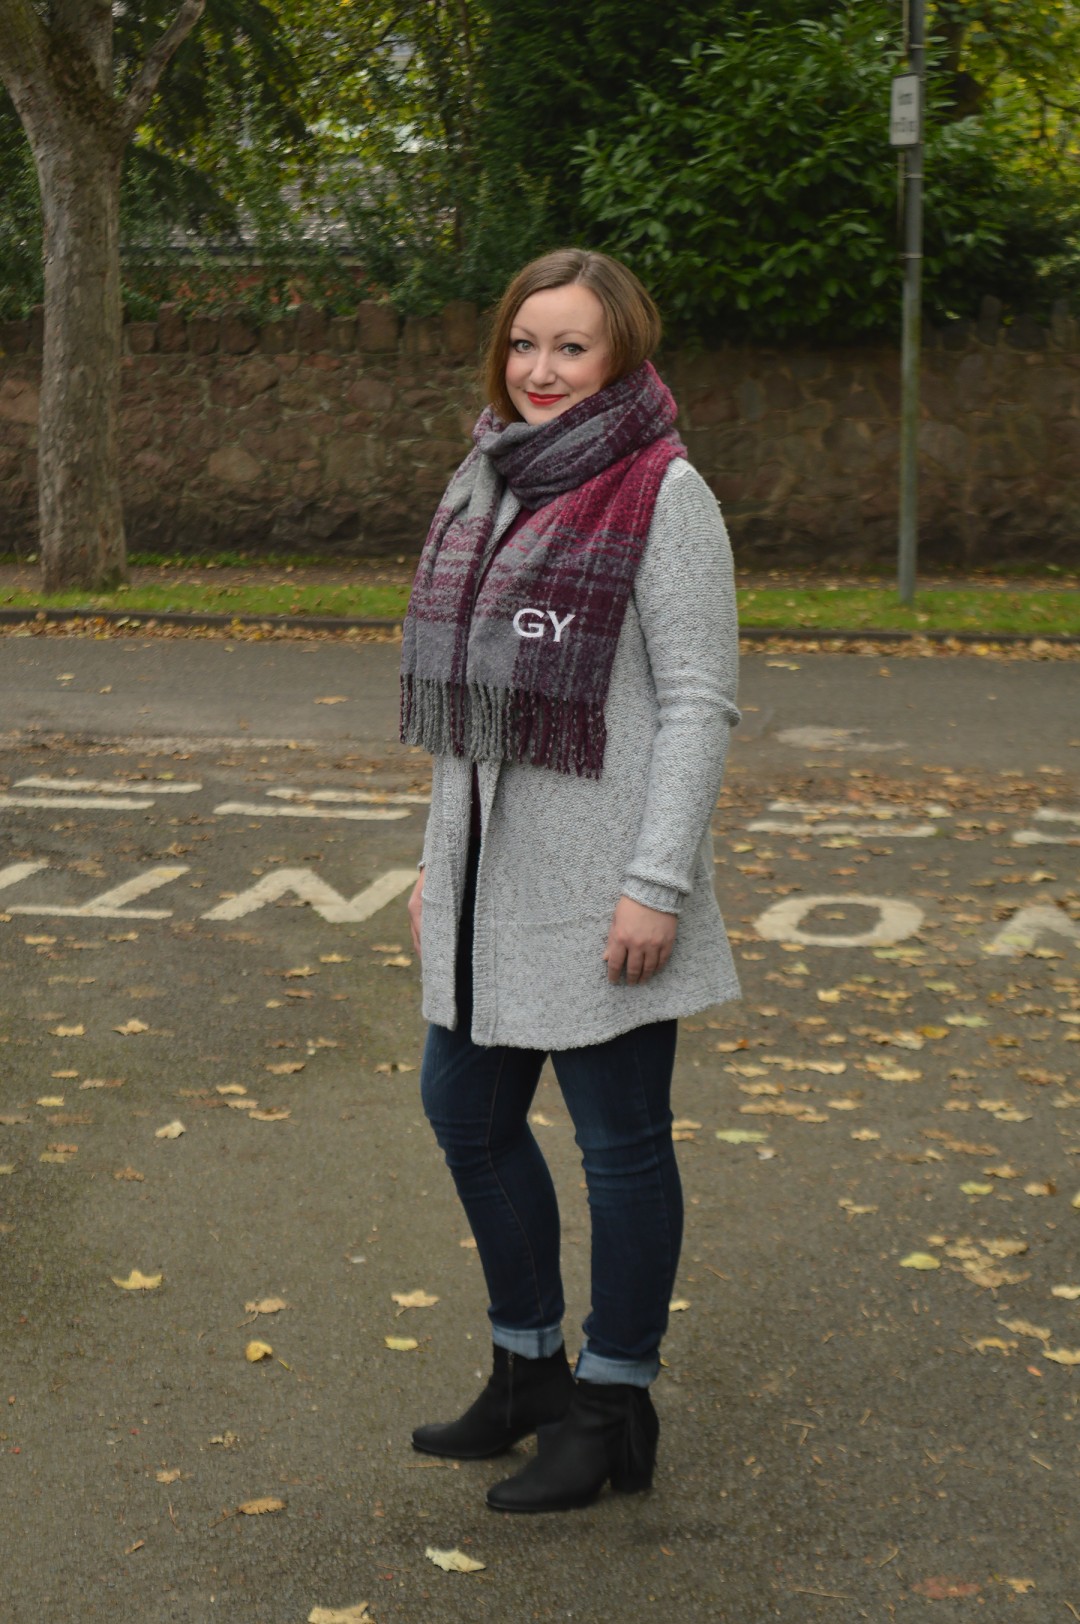 White Stuff Charity Scarf Outfit – JacquardFlower